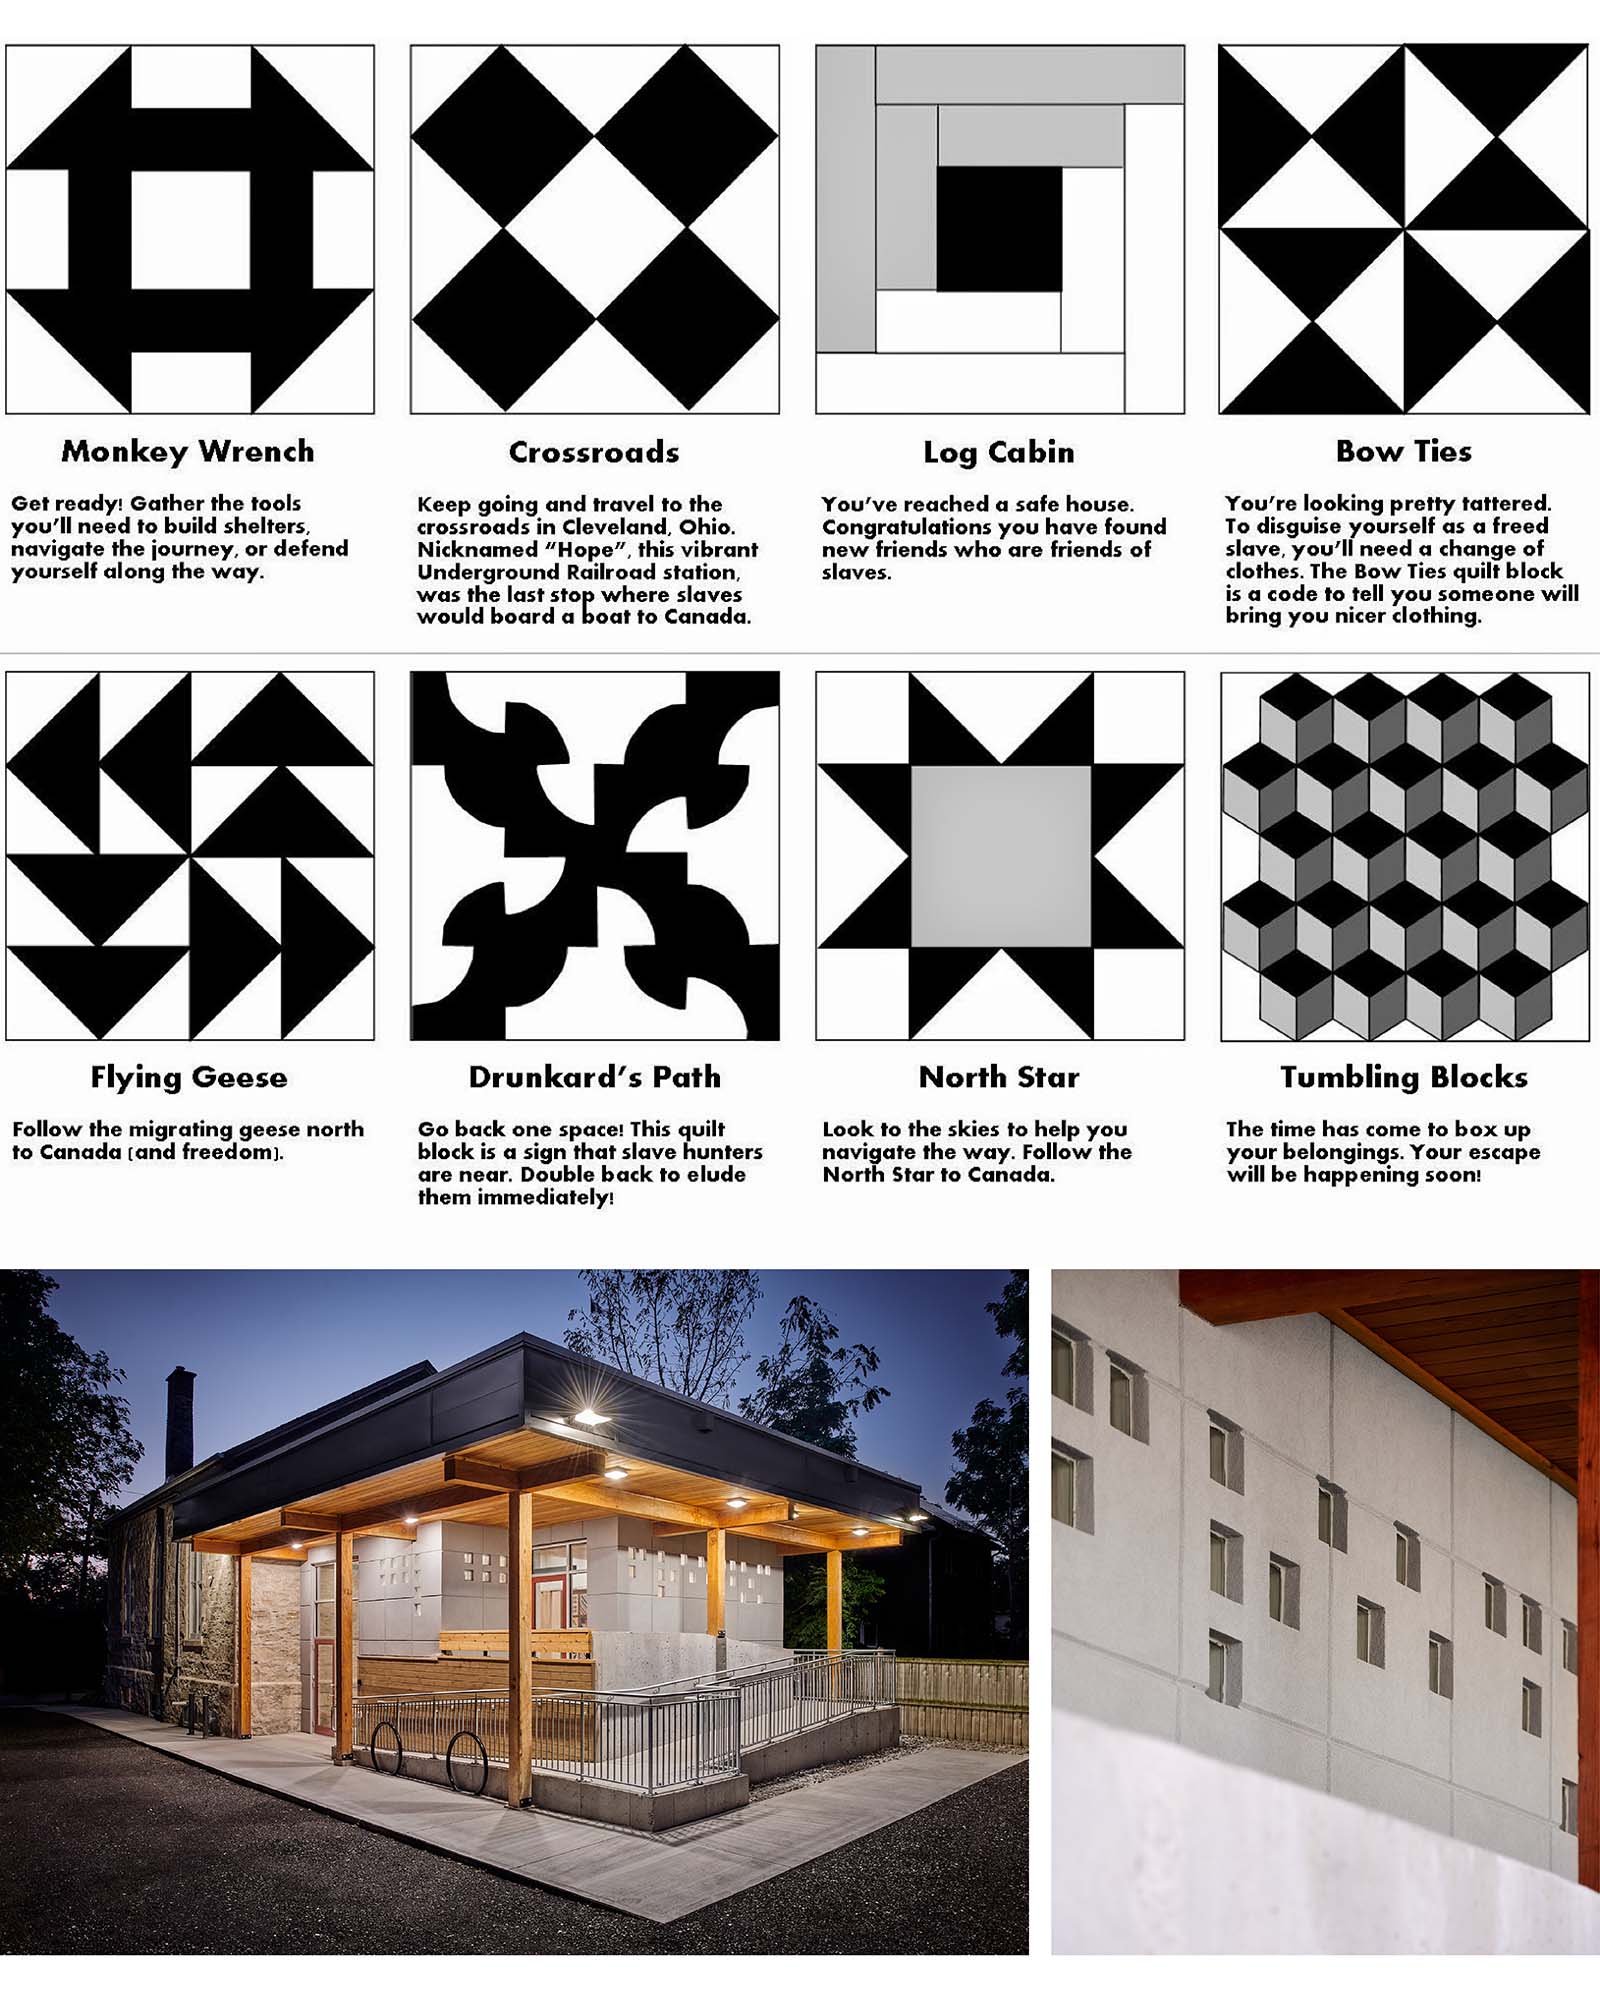 Top: Eight black and white graphics of square quilt patterns arranged in a 2x4 grid. Under each pattern is descriptive text  indicating its meaning. Bottom left: Attaching directly to Heritage Hall’s original stone facade, the new addition includes a concrete structure under a large roof overhang with wooden soffits and columns. Bottom right: A concrete wall with a grid etched into the surface is perforated by rows of glass blocks.